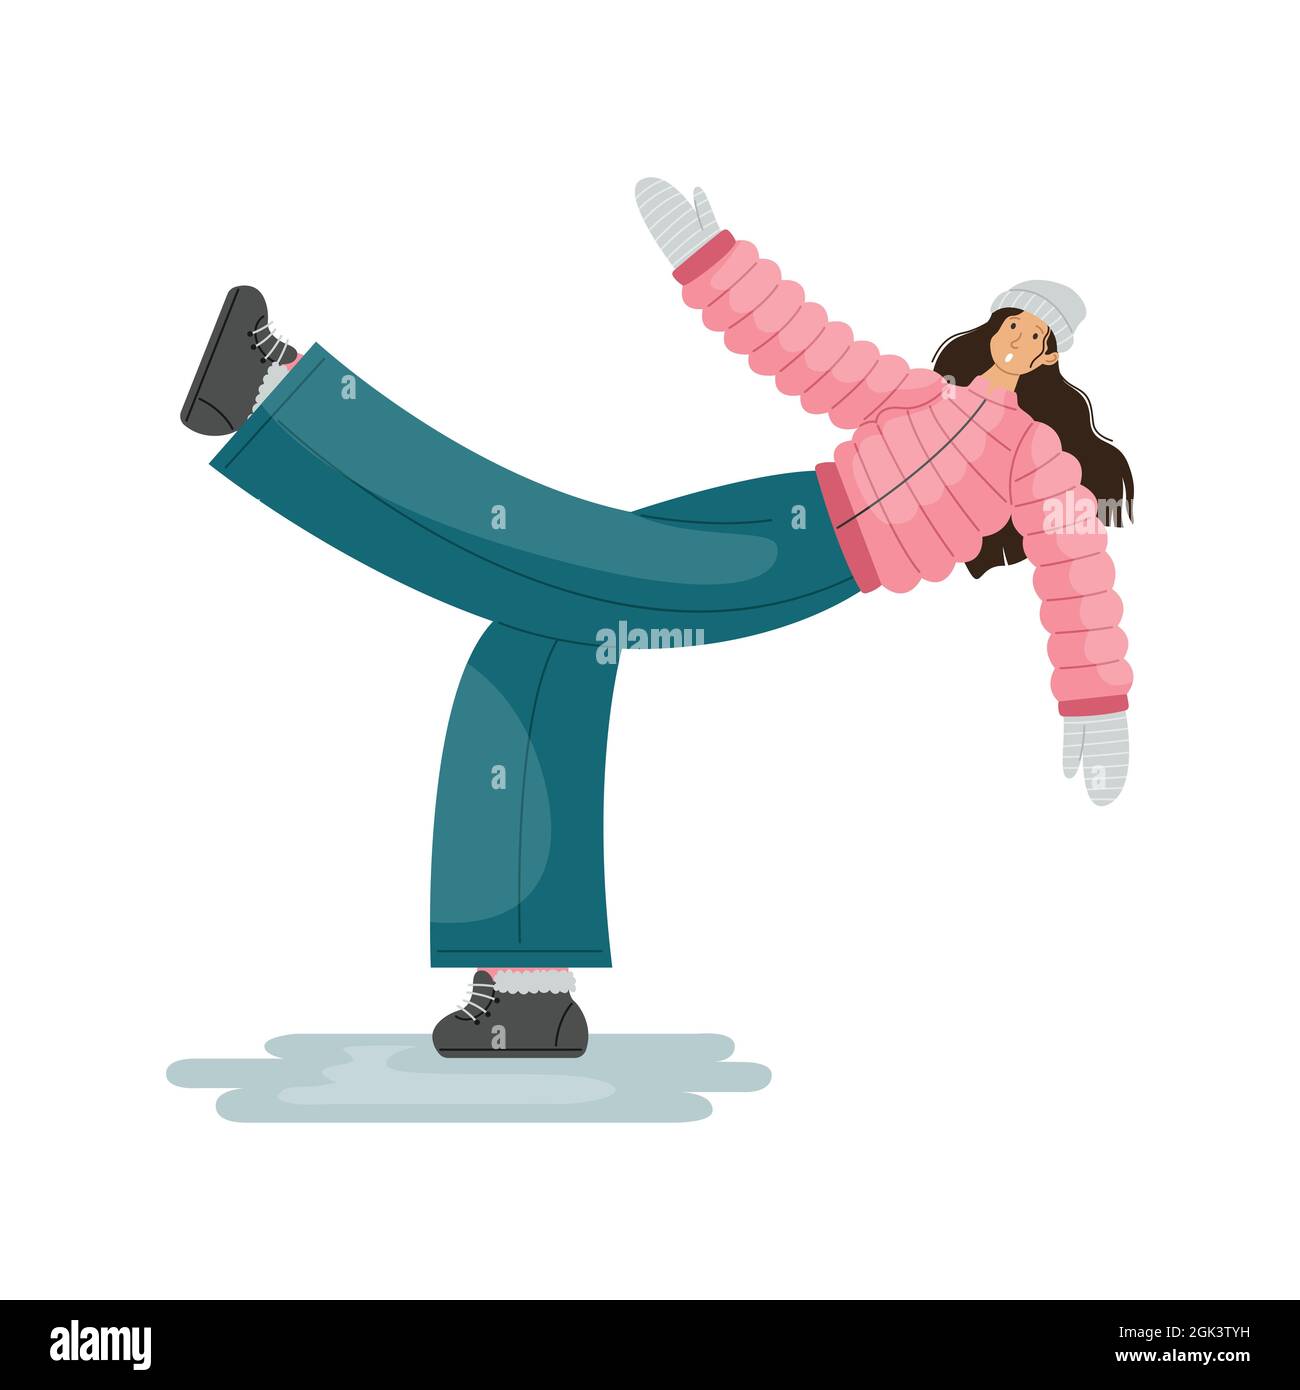 Vector illustration of a man who slipped on the ice on the sidewalk. Stock Vector